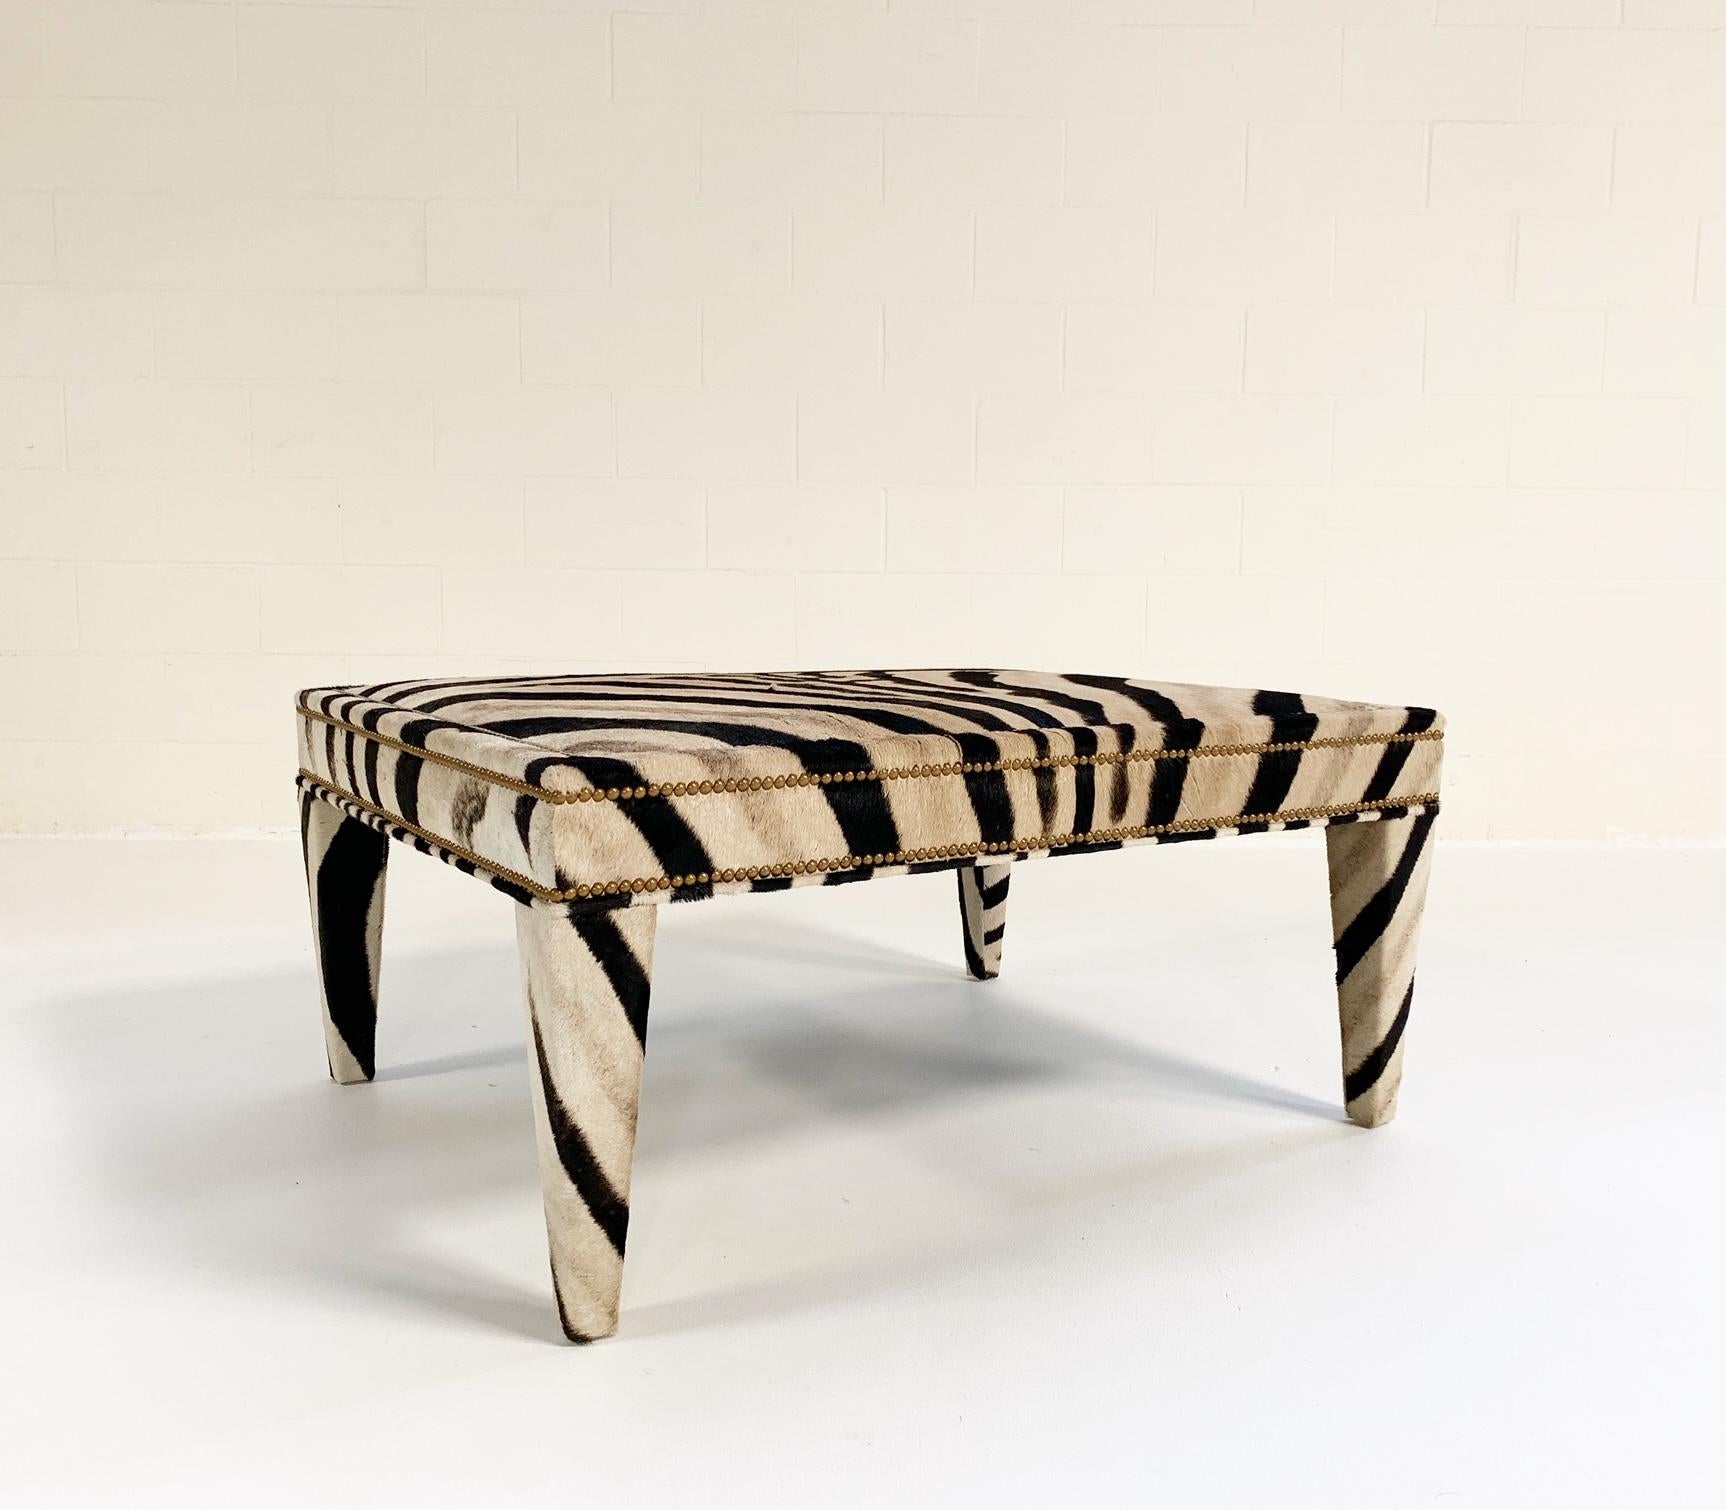 A Forsyth signature item, this zebra hide ottoman can double as a chic and elegant coffee table. Custom made to order in the Forsyth studio, the zebra hide is masterfully wrapped around a wooden frame and expertly finished with brass nailheads. Each